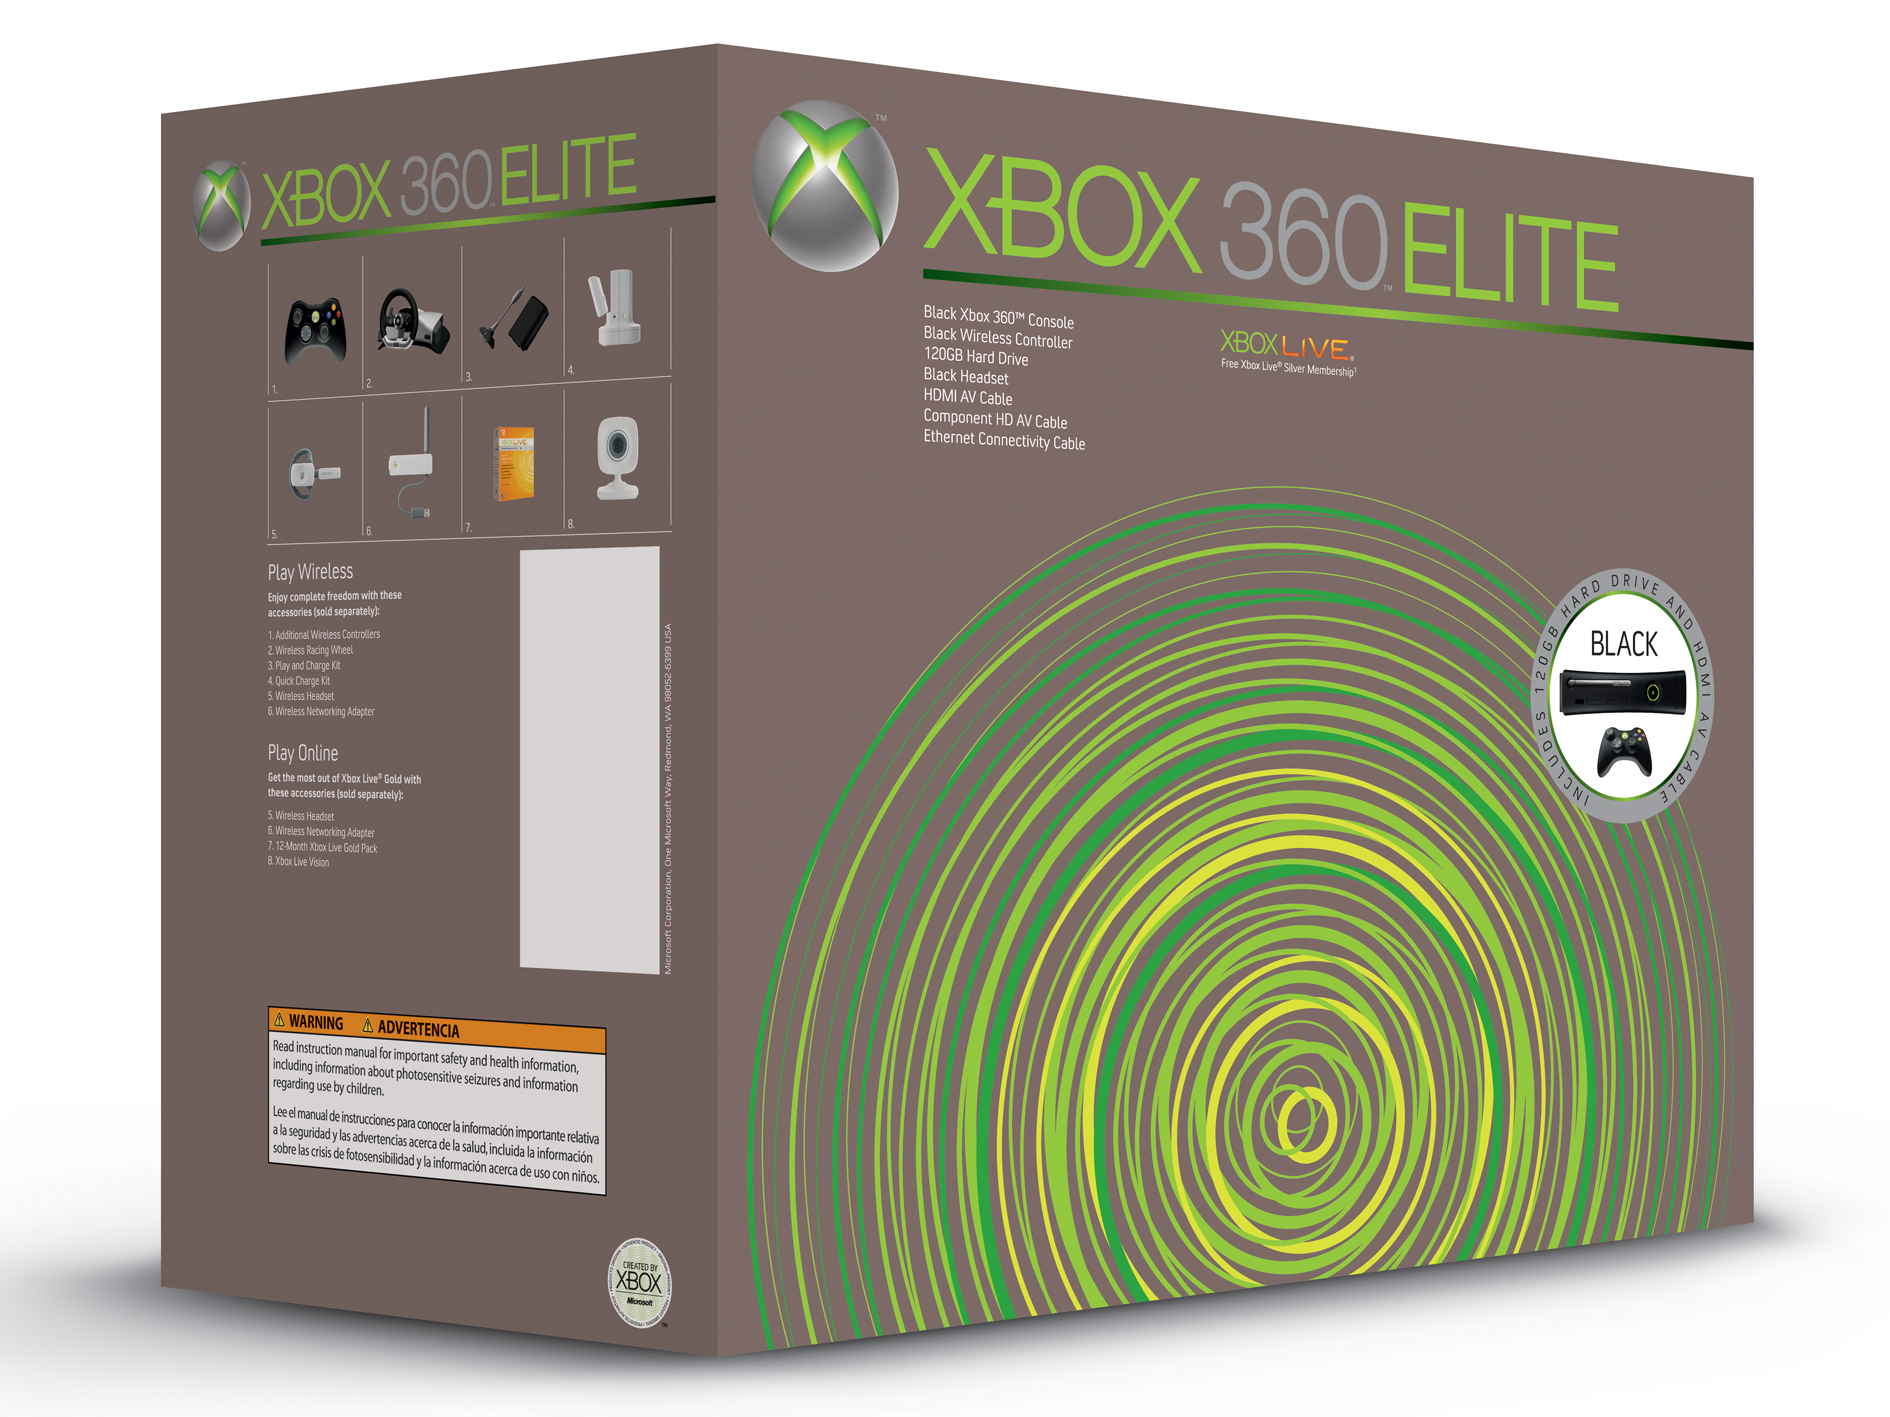 release date of the xbox 360